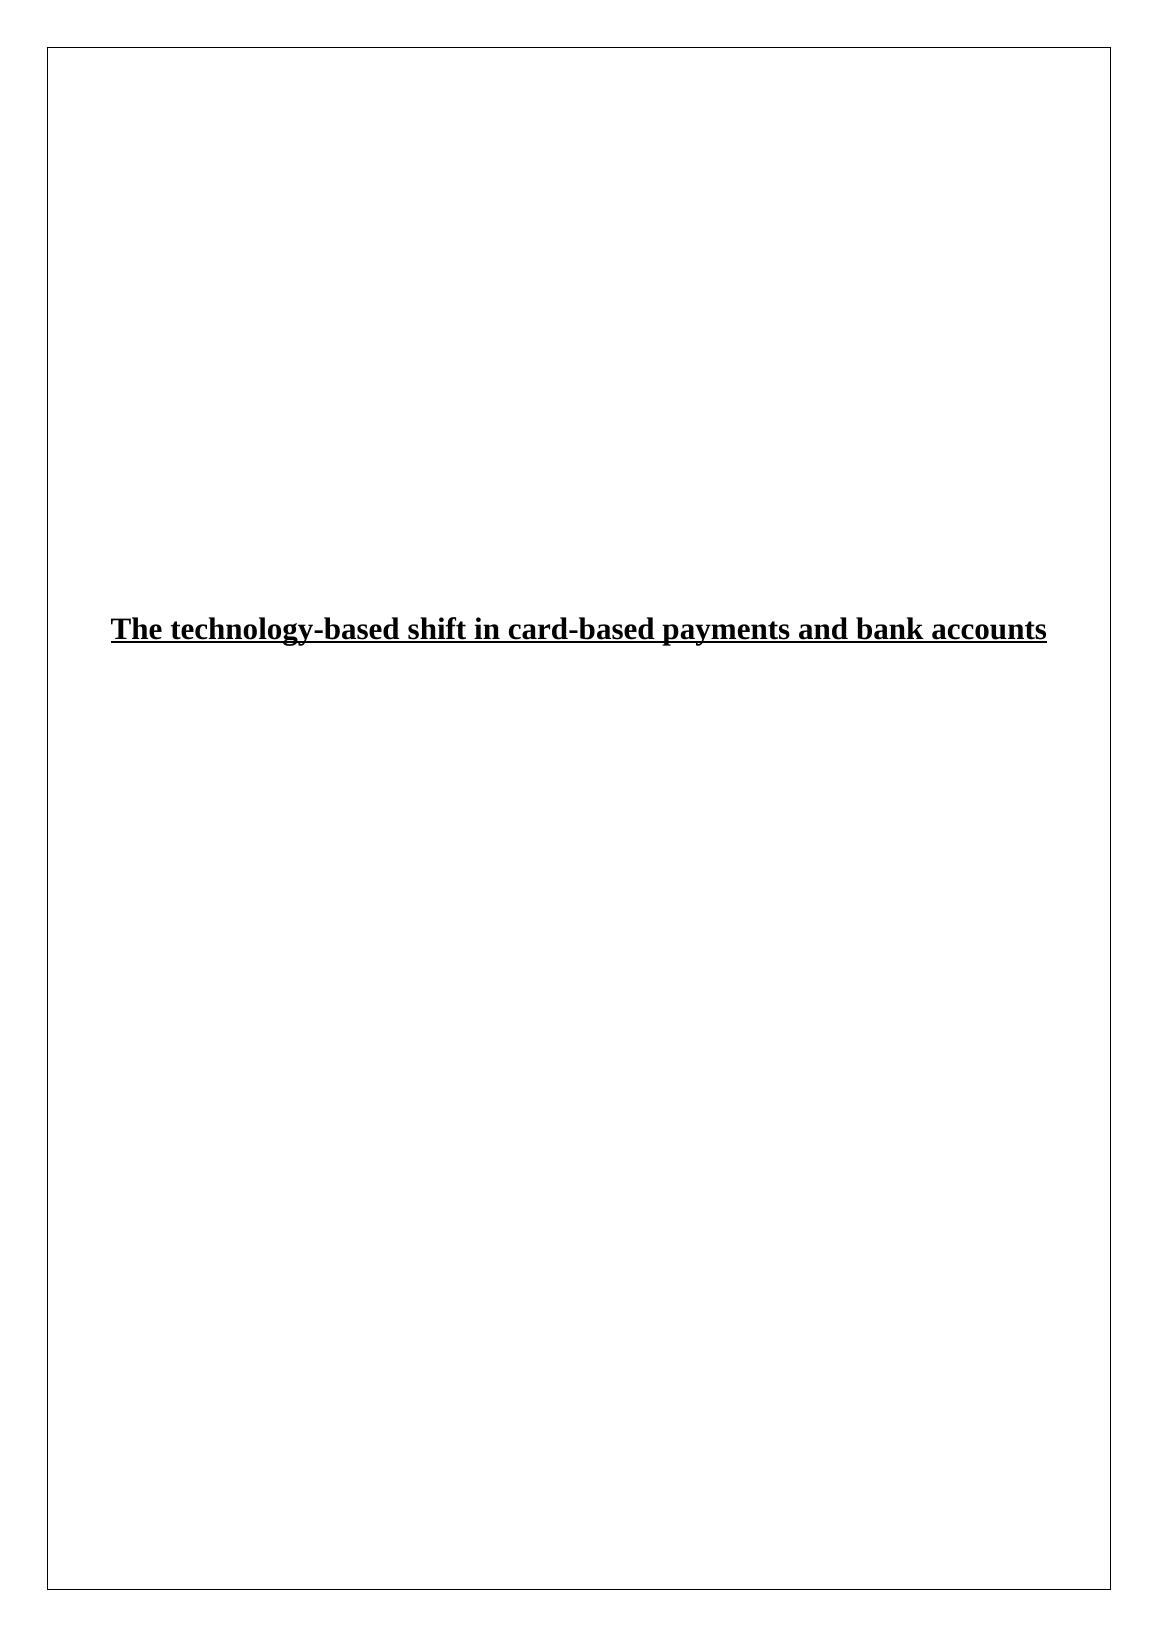 Technology Shift - Card-based Payments and Banking_1